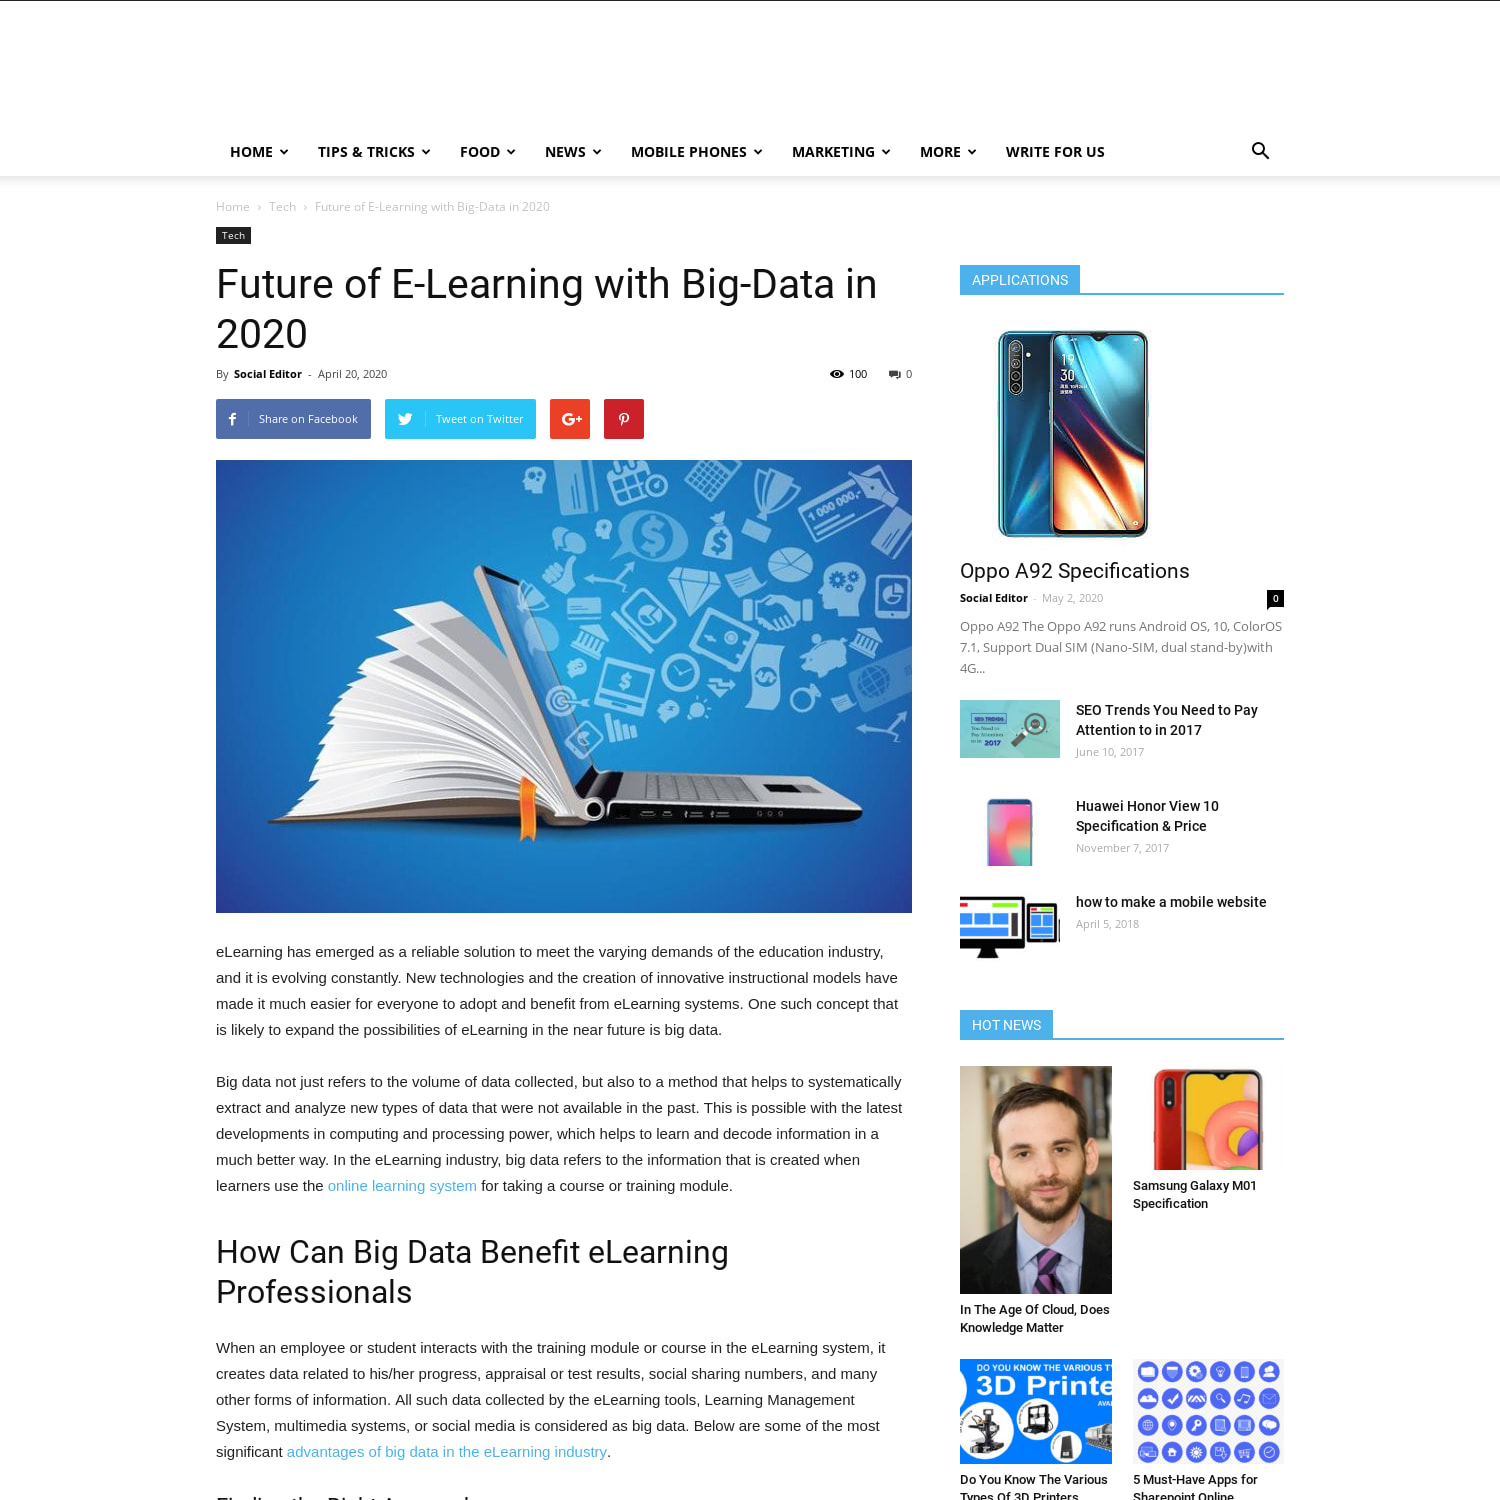 Future of E-Learning with Big-Data in 2020